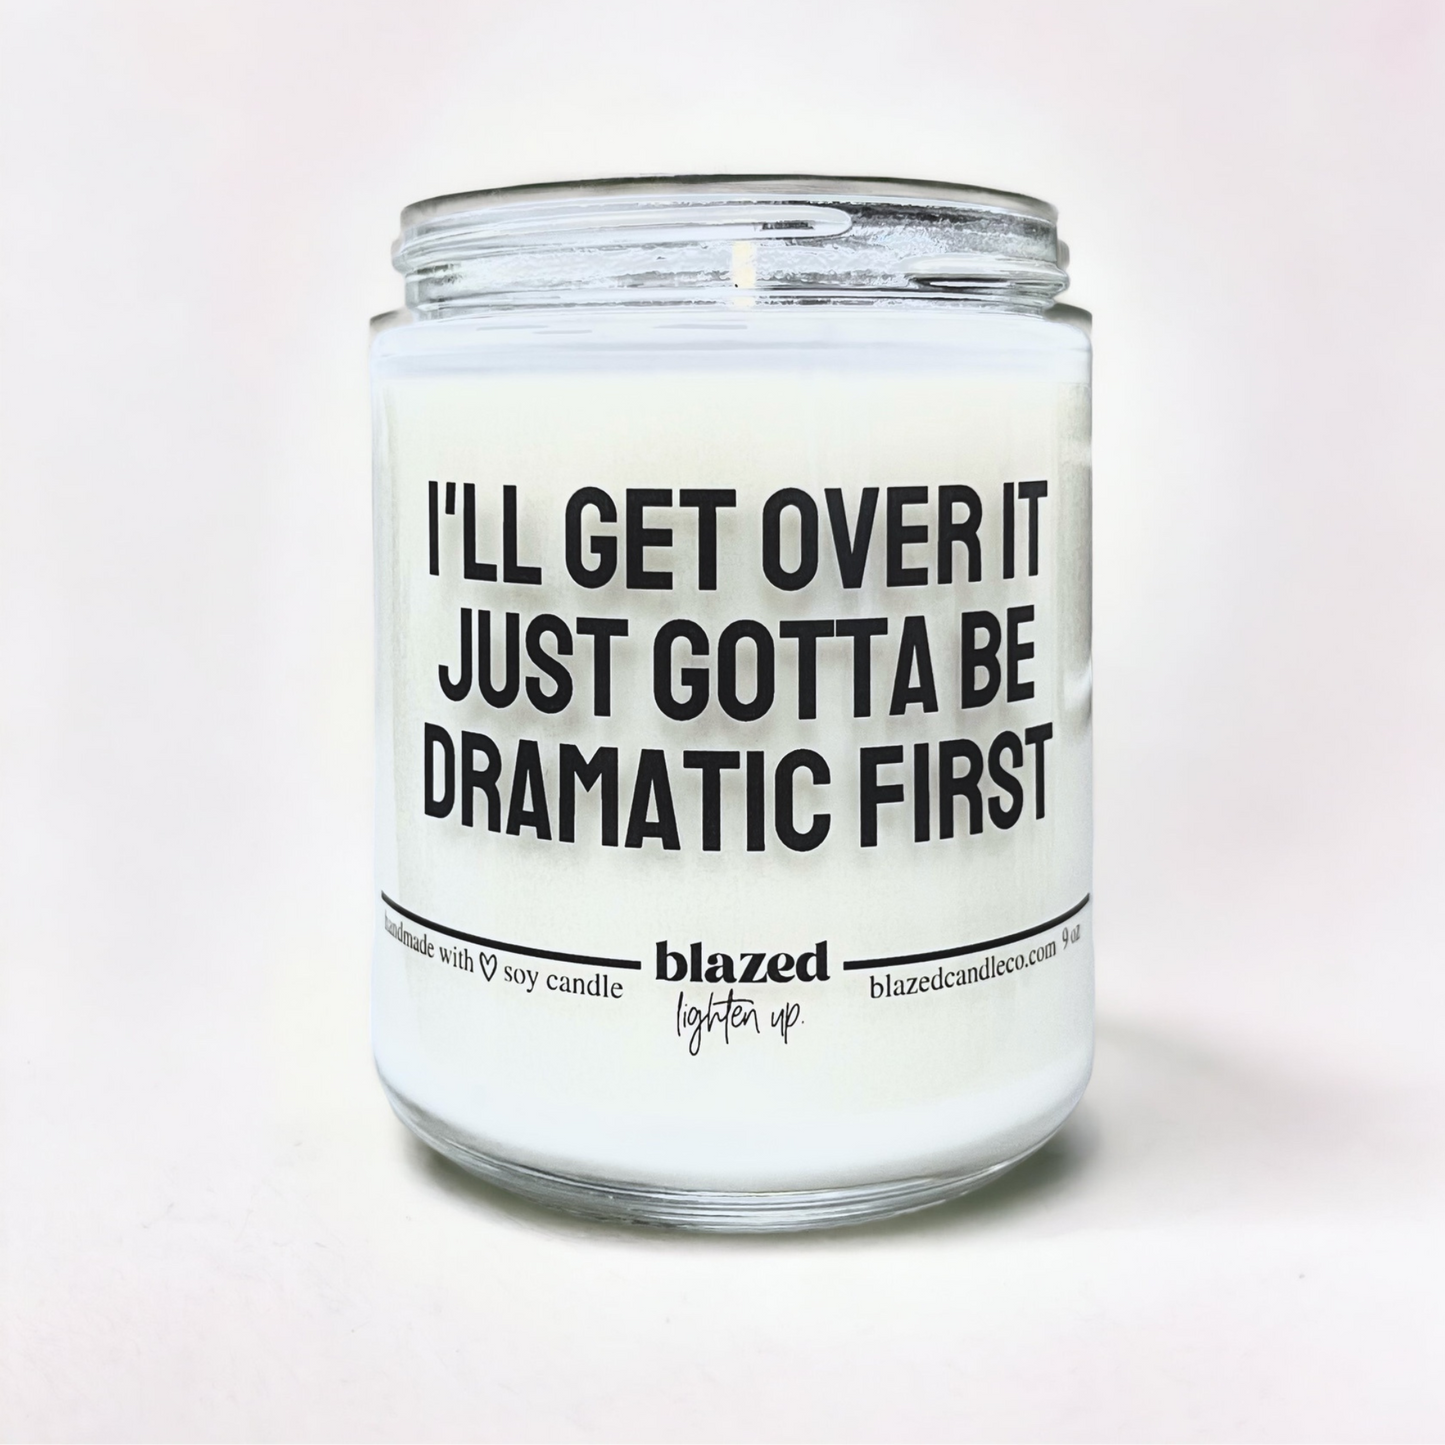 Gotta Be Dramatic First Candle